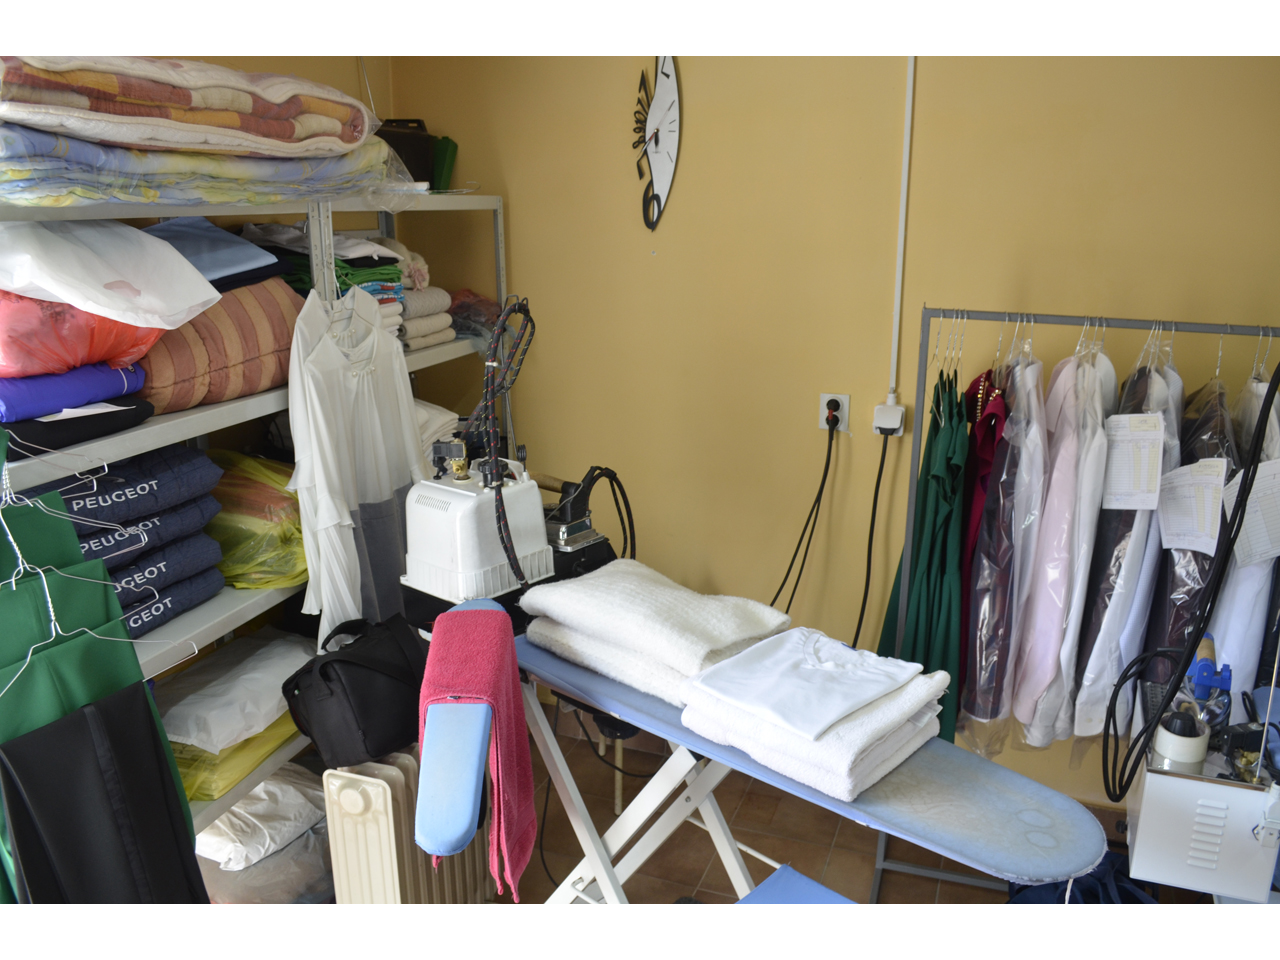 Photo 2 - GLANC WASH - DRY CLEANING AND LAUNDRY Laundries Belgrade